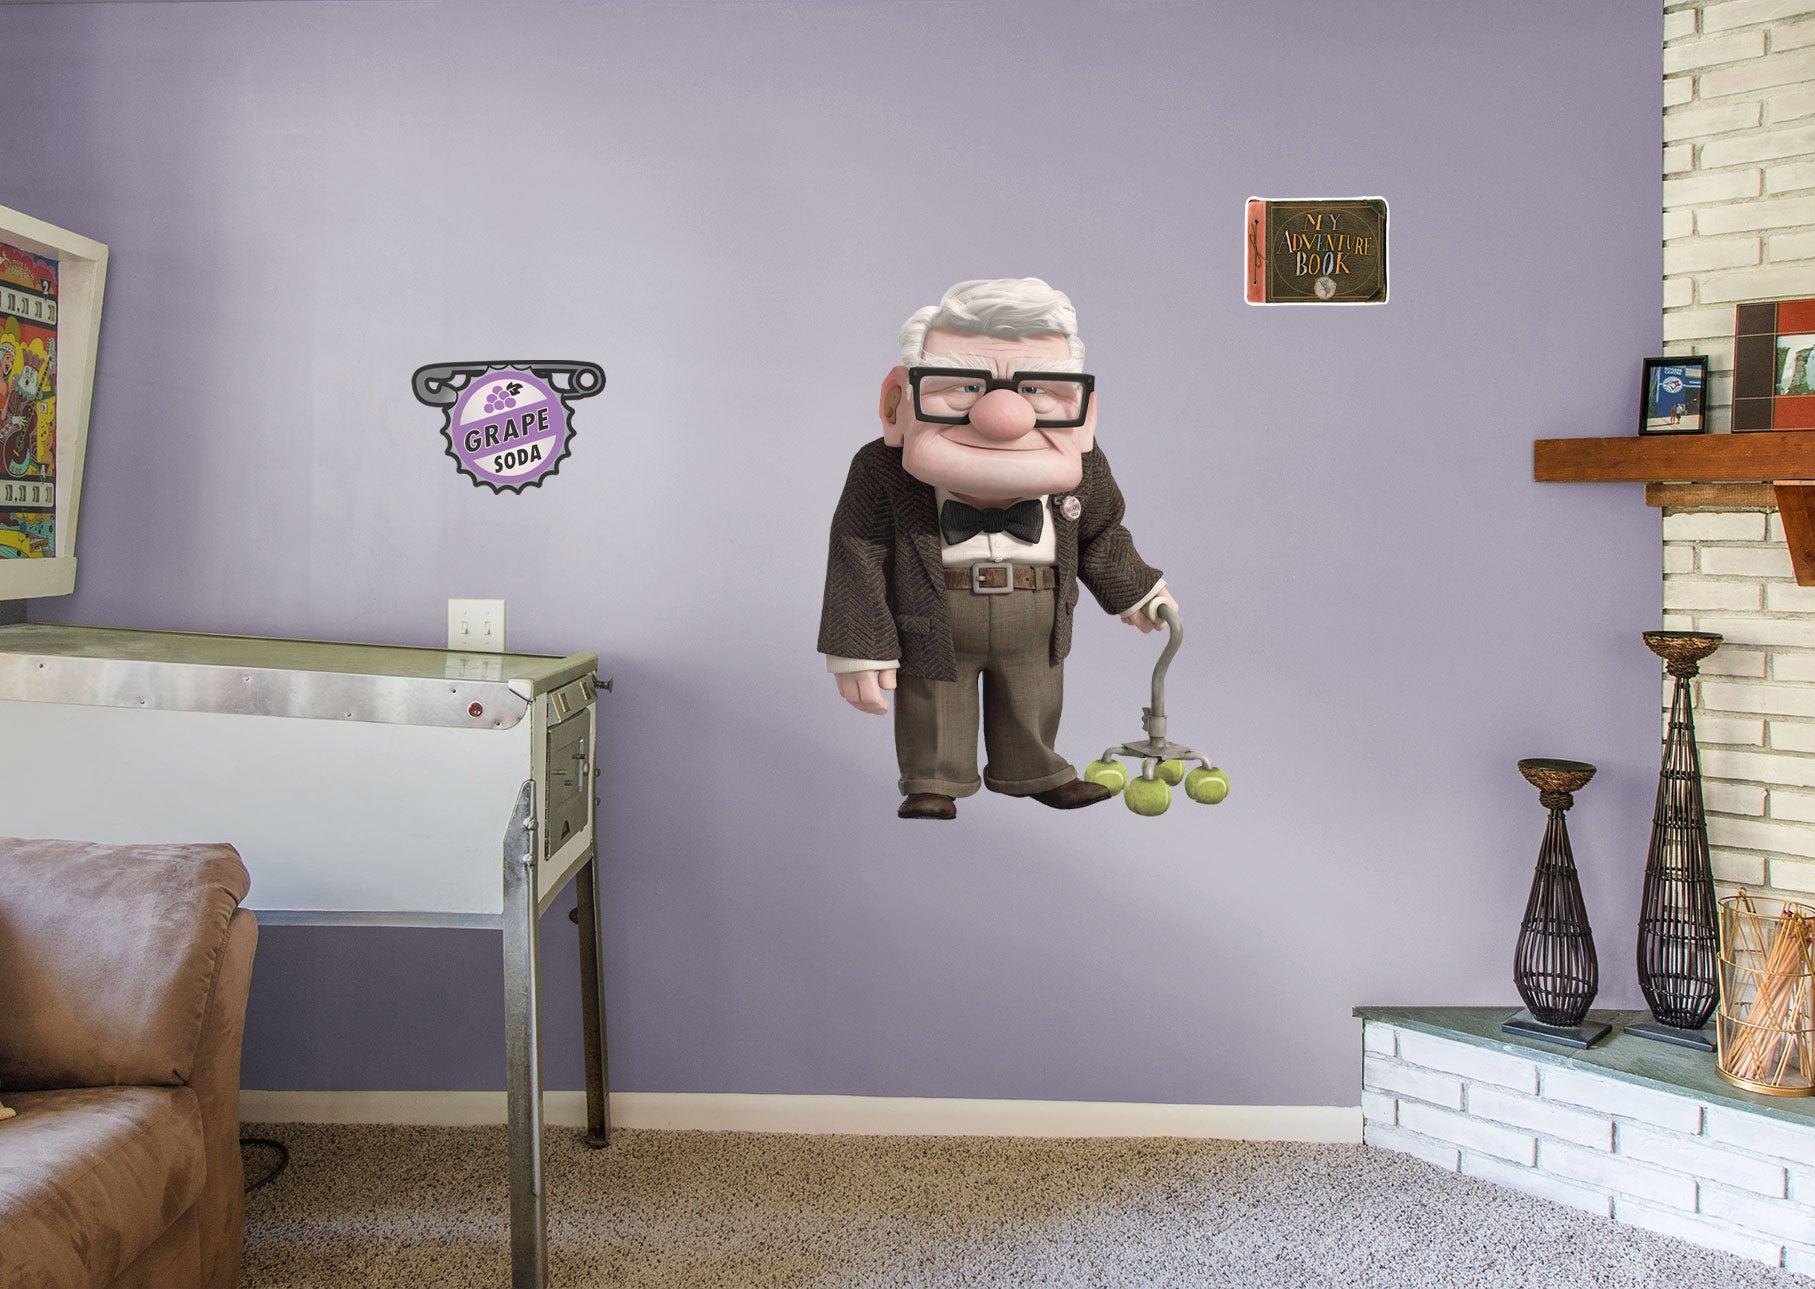 Up: Kevin RealBig - Disney Removable Wall Adhesive Wall Decal Giant Character +2 Wall Decals 38W x 48H